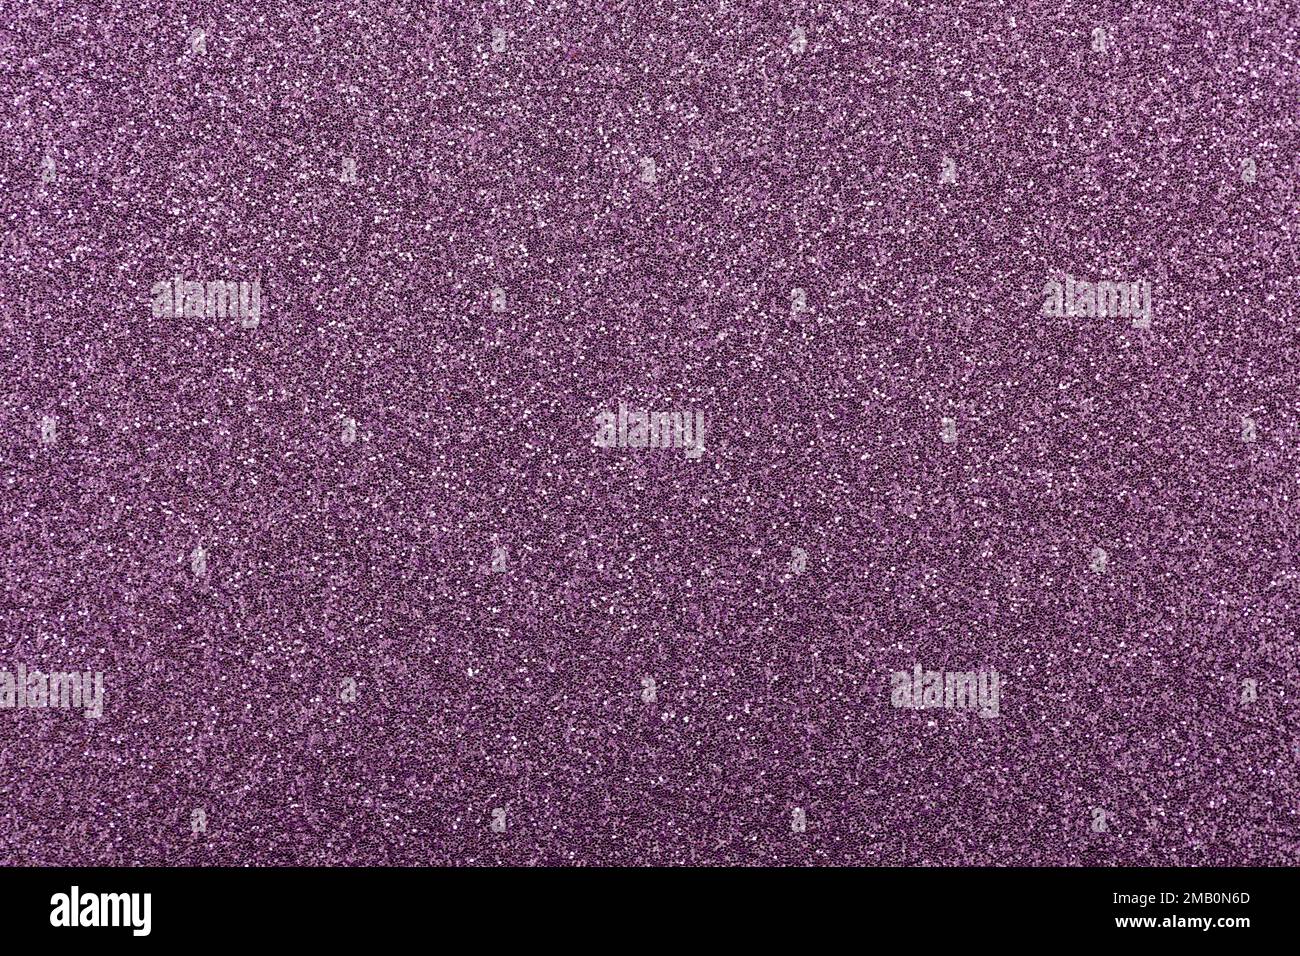 This image shows a macro abstract background of sparkling purple glitter texture surface. Stock Photo